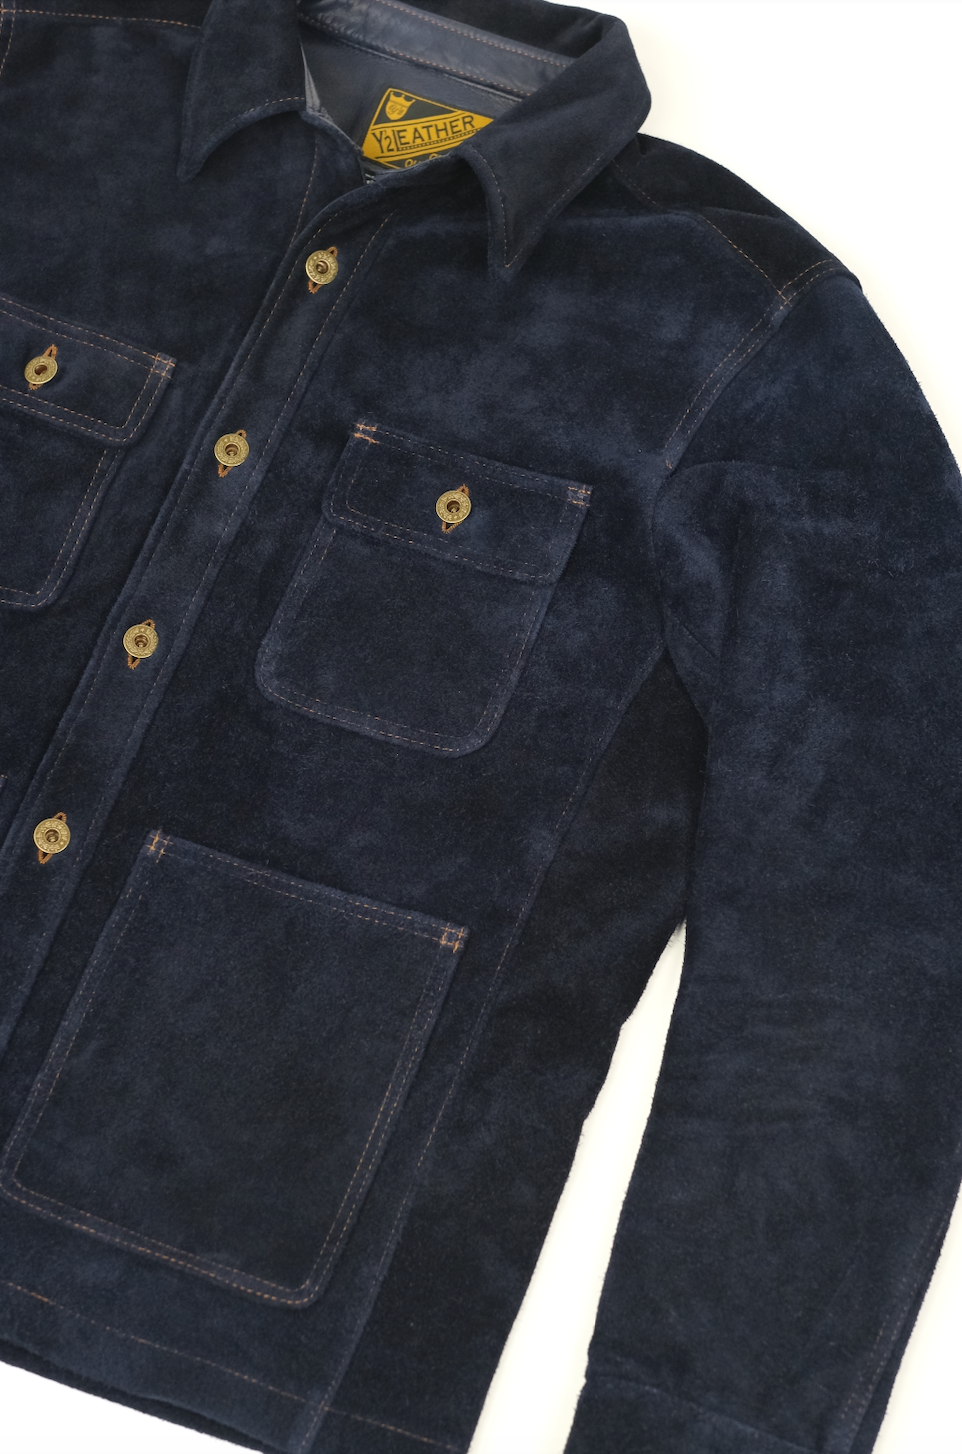 The Shop Vancouver Chore Shirt Steer rough out Navy